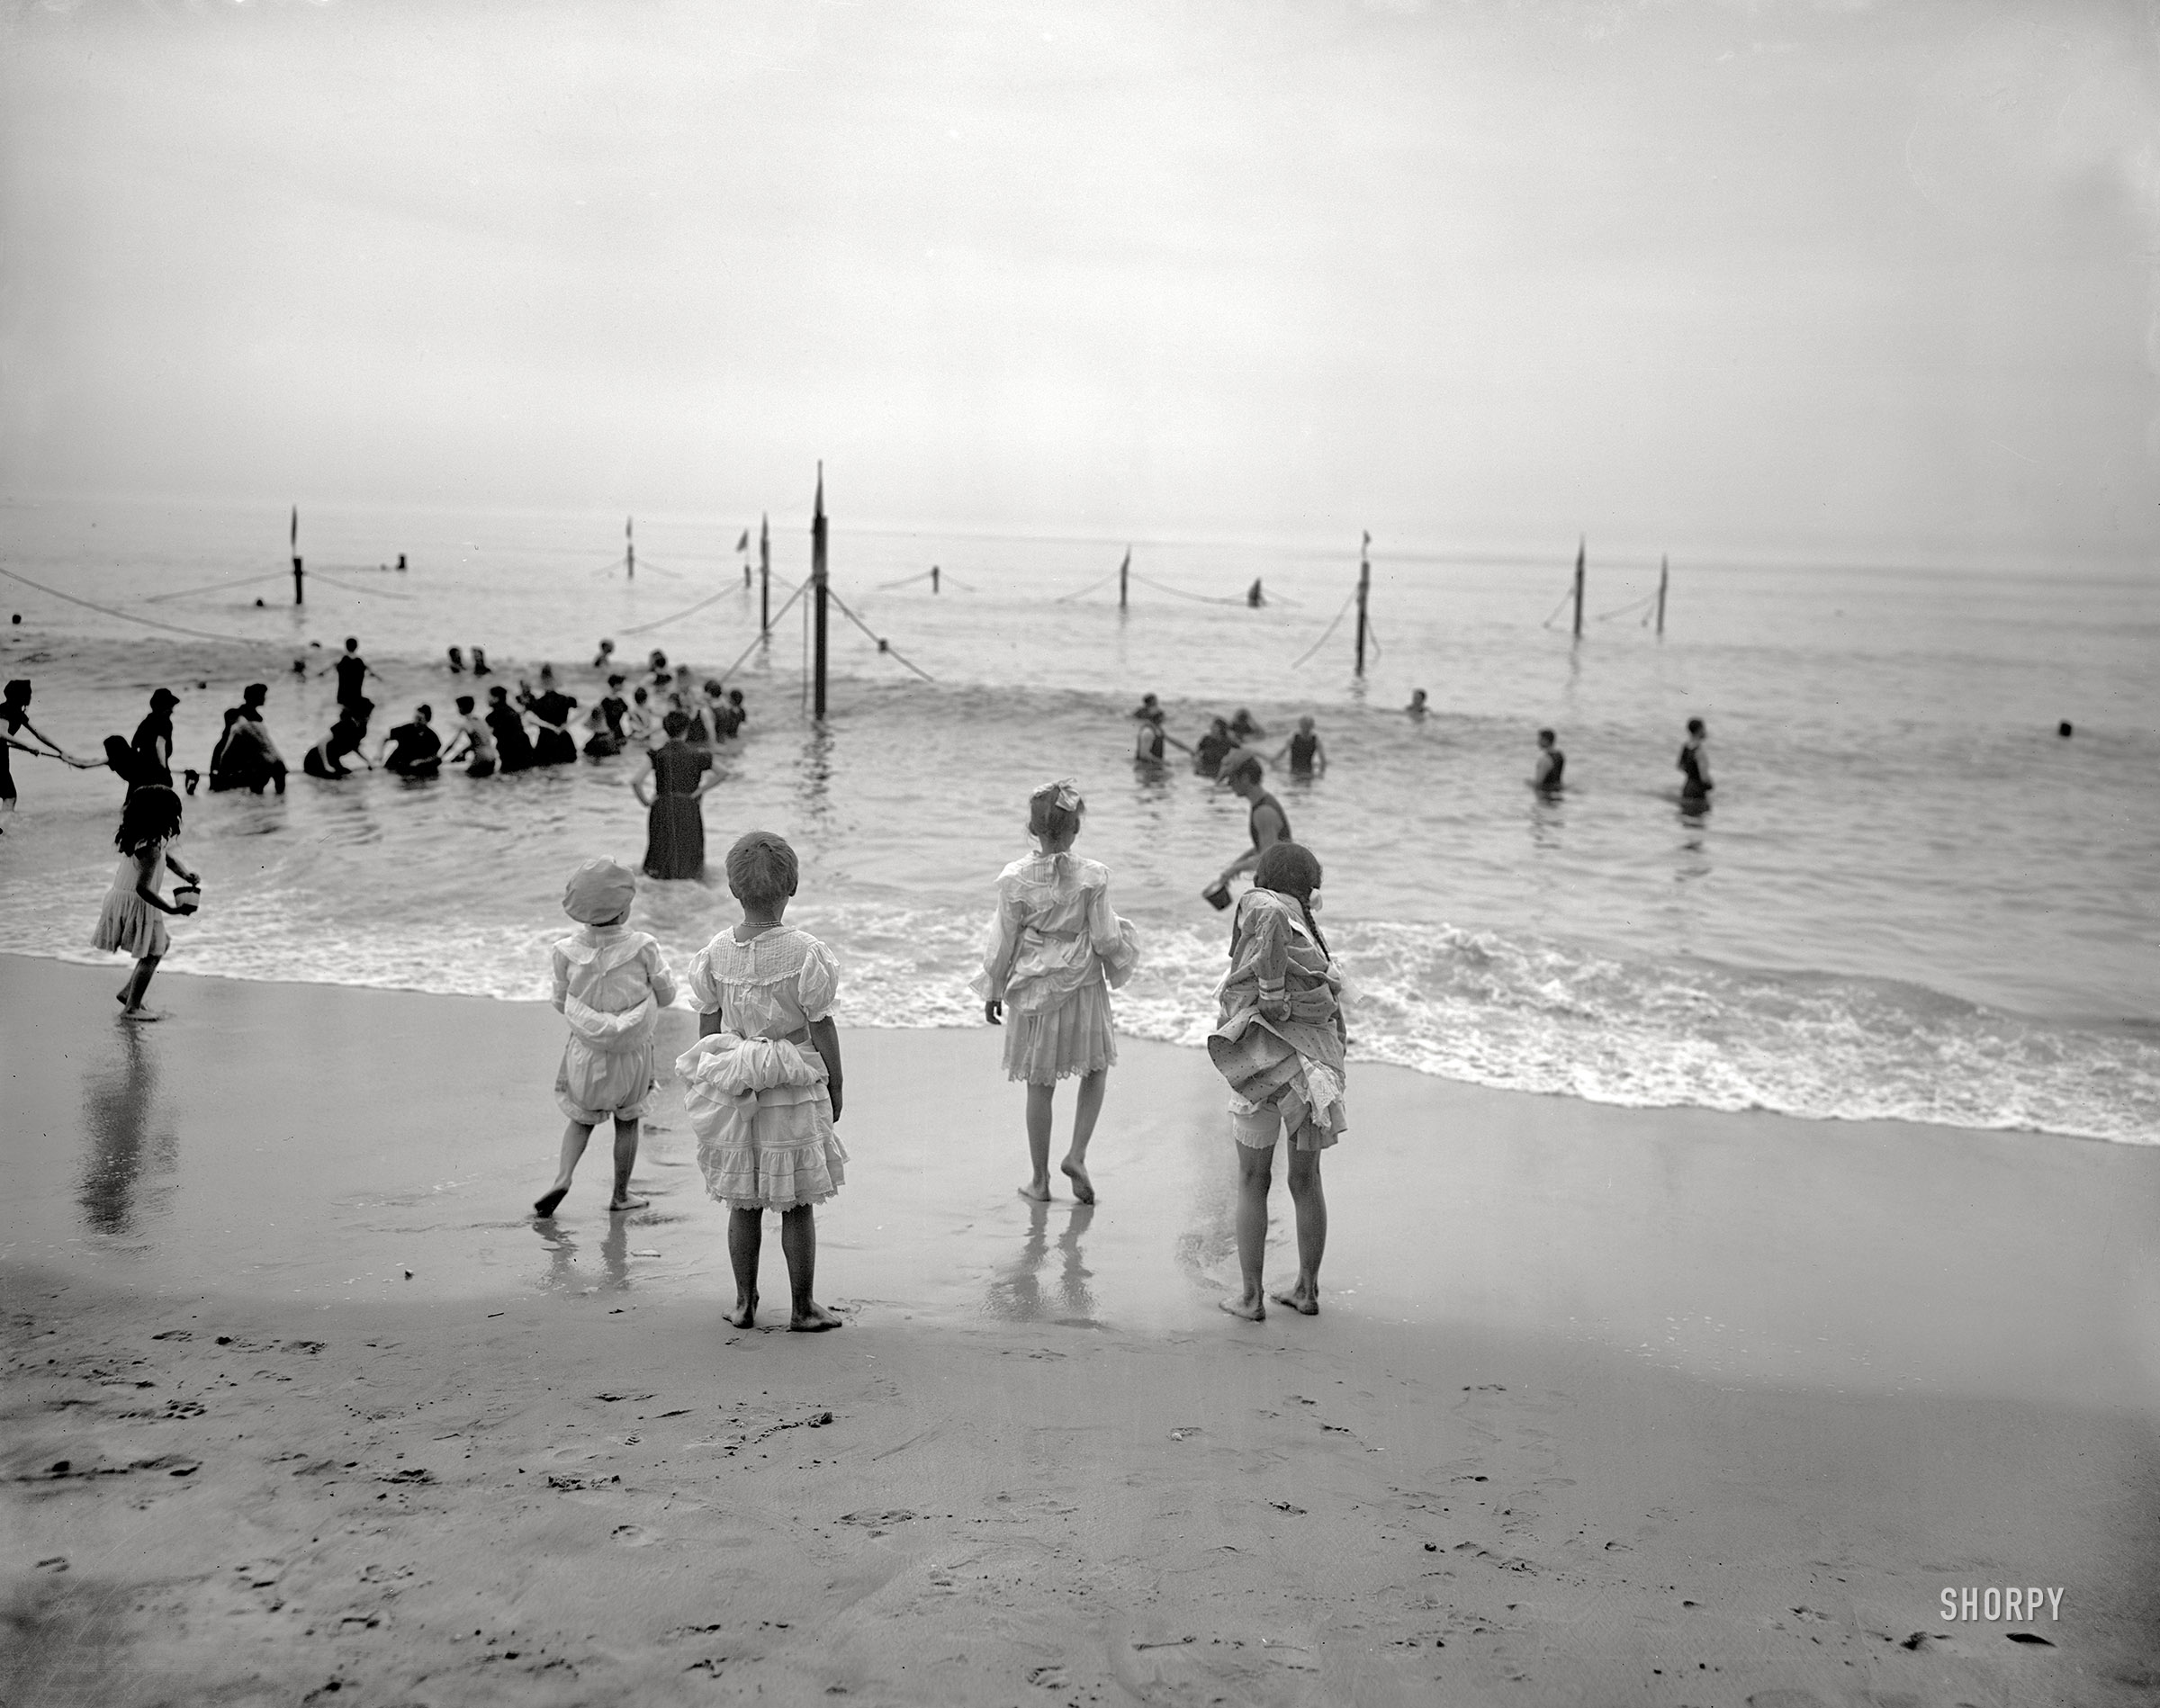 Circa 1905. "On the beach at Coney Island." The bathing-costumes this season are even skimpier than last year's. 8x10 inch glass negative. View full size.